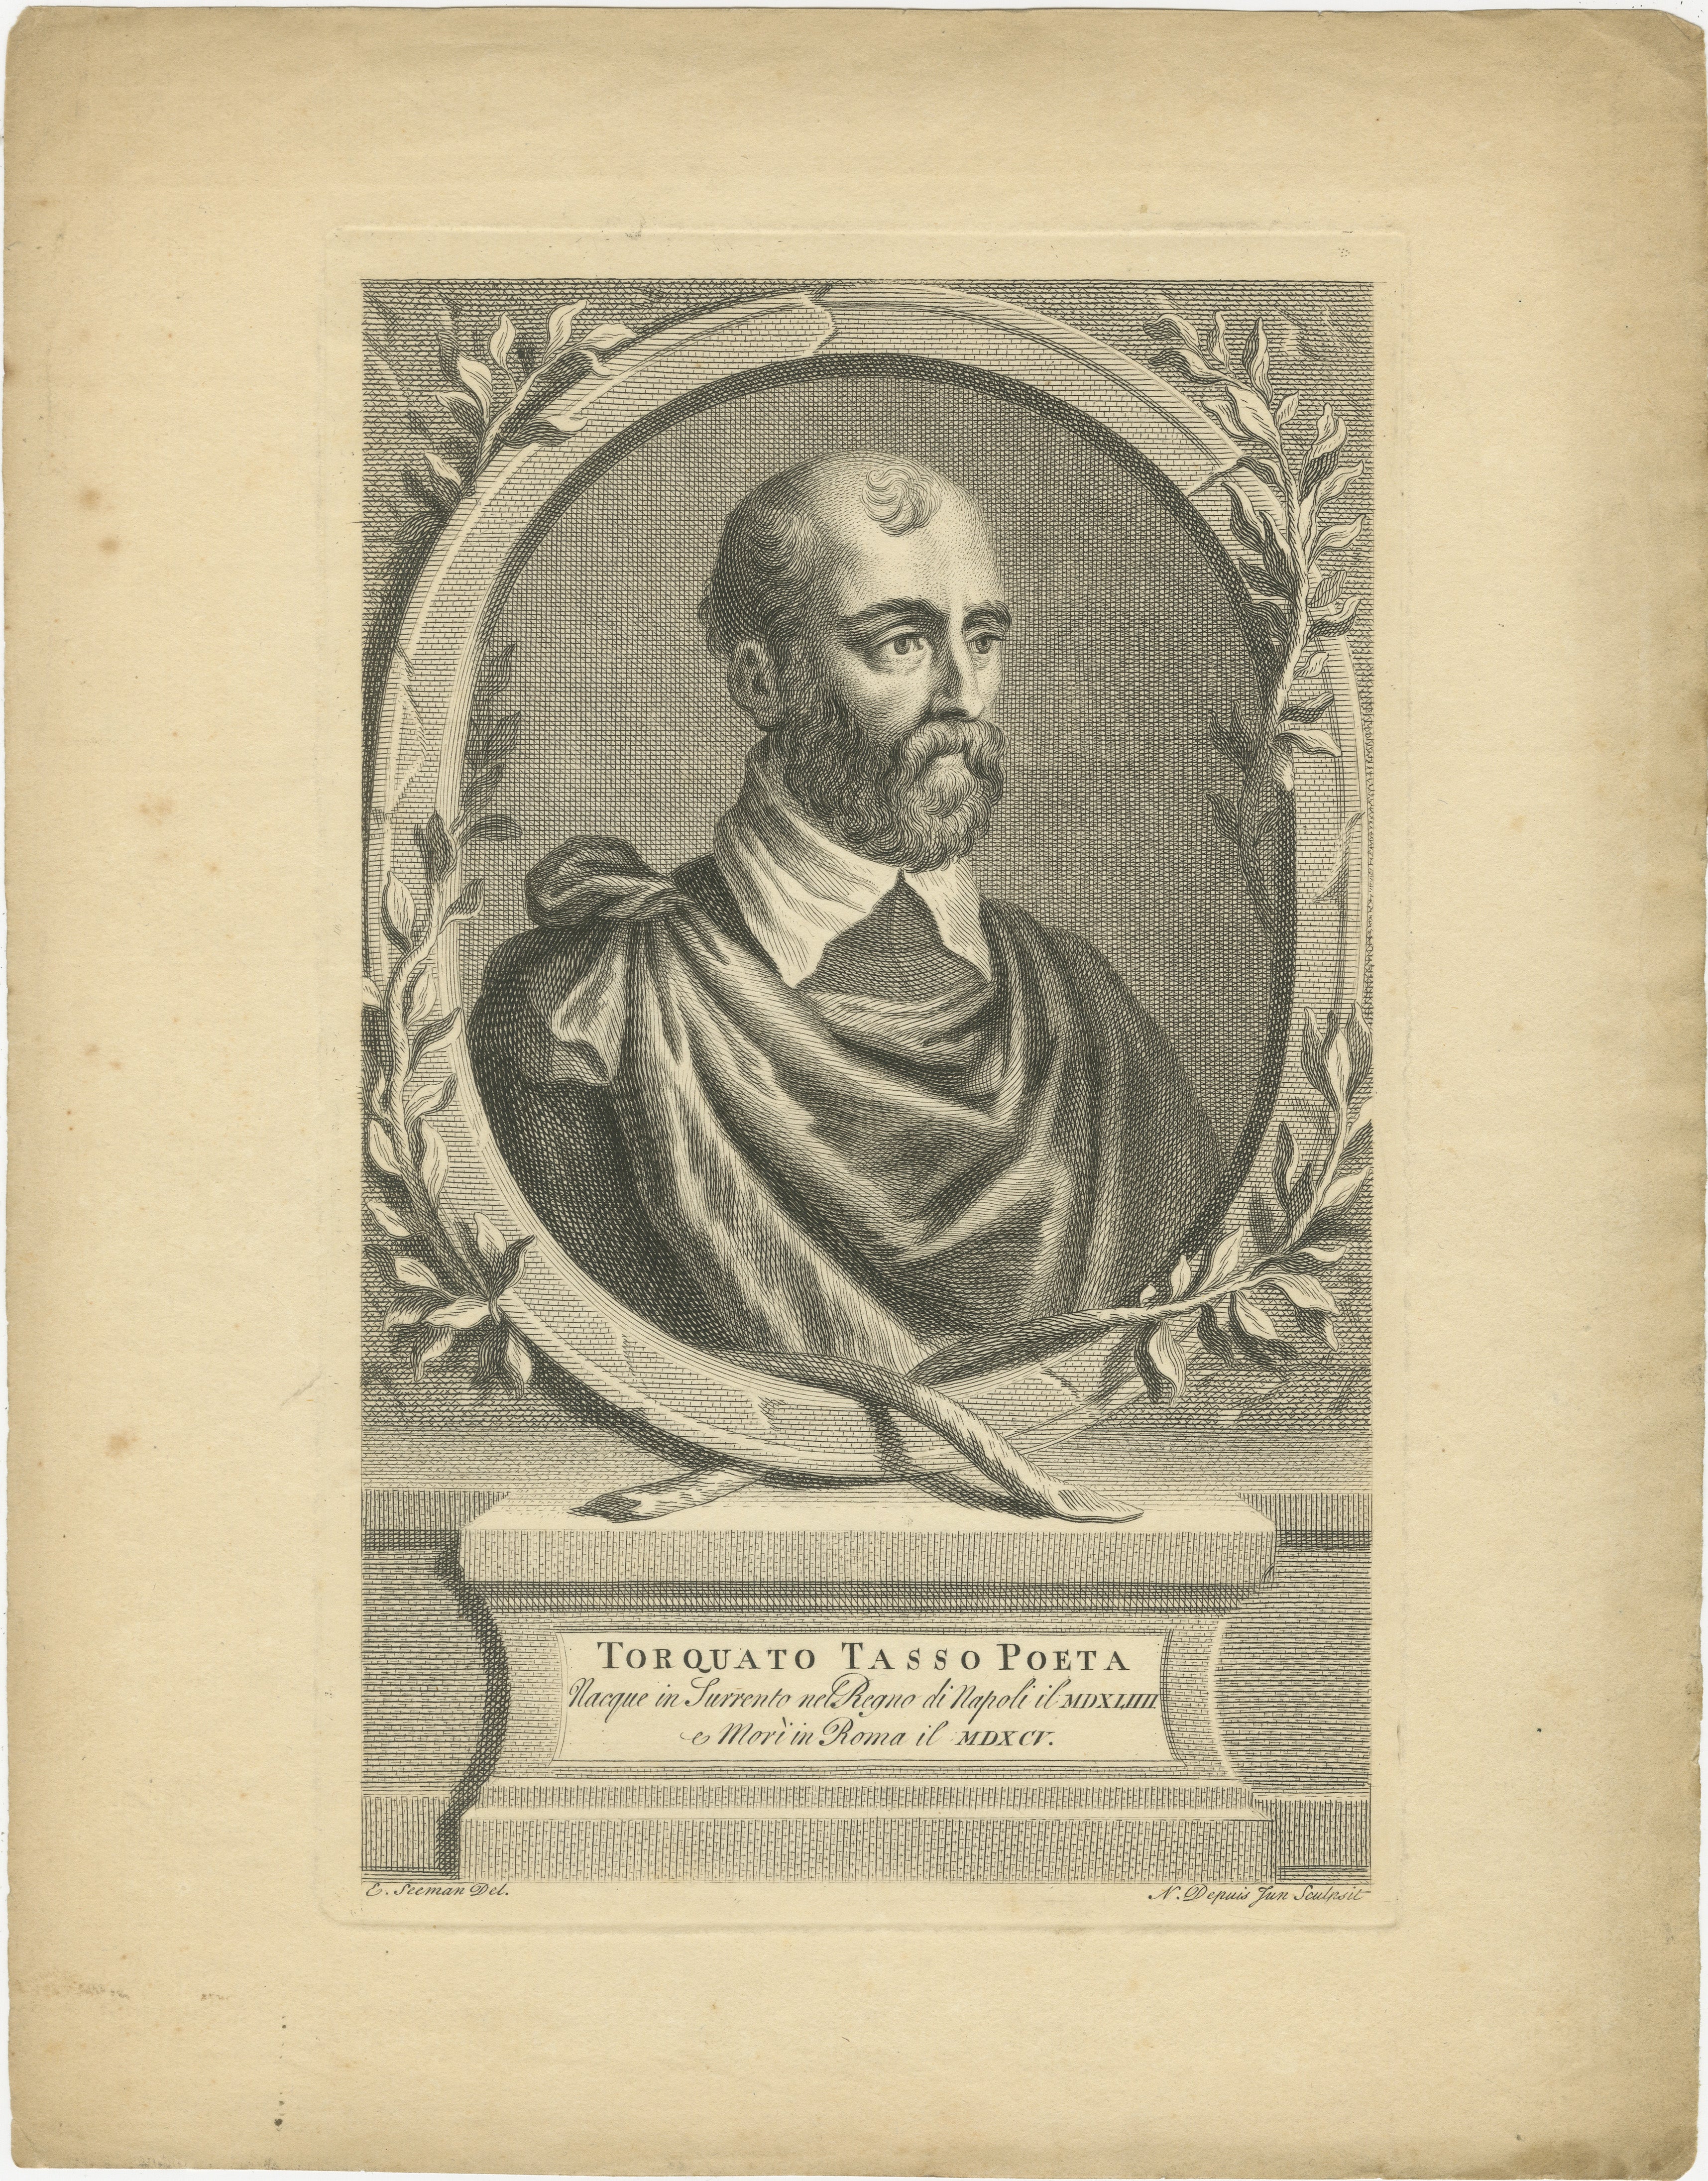 An engraving of Torquato Tasso, a prominent Italian poet of the 16th century, best known for his epic poem 